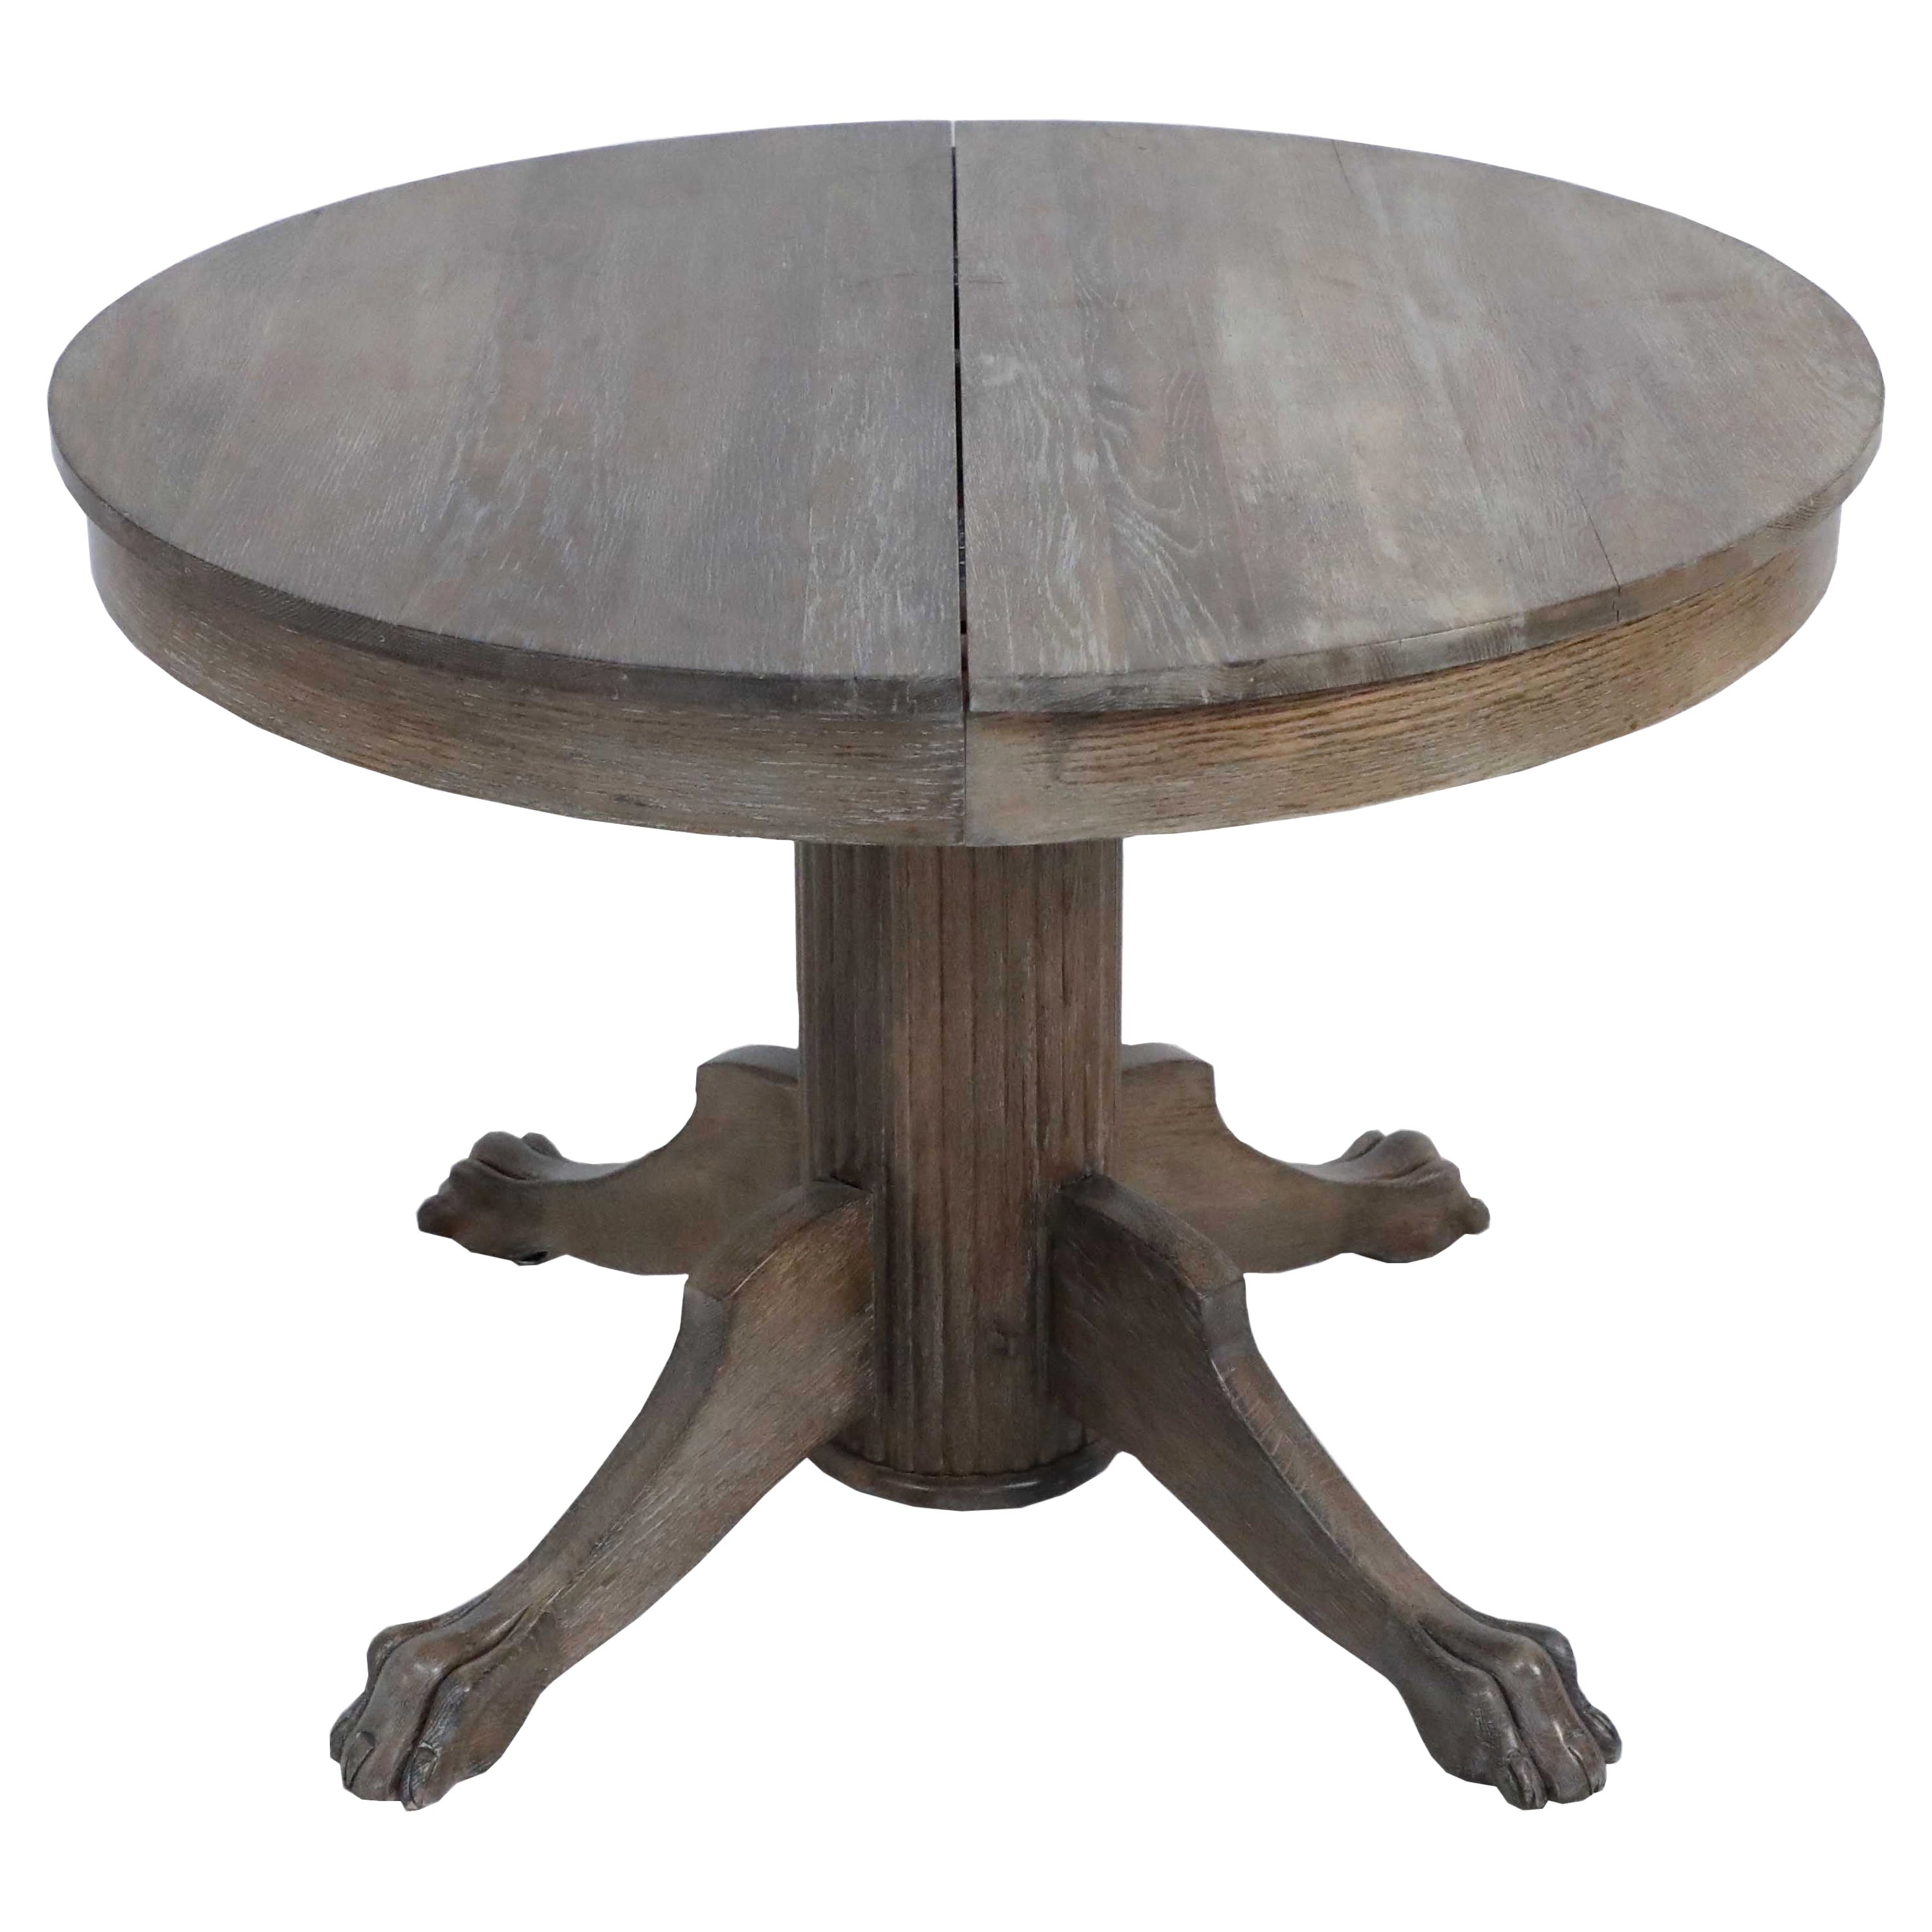 English Edwardian Cerused Oak Circular Claw Foot Center/Dining Table with Leaves